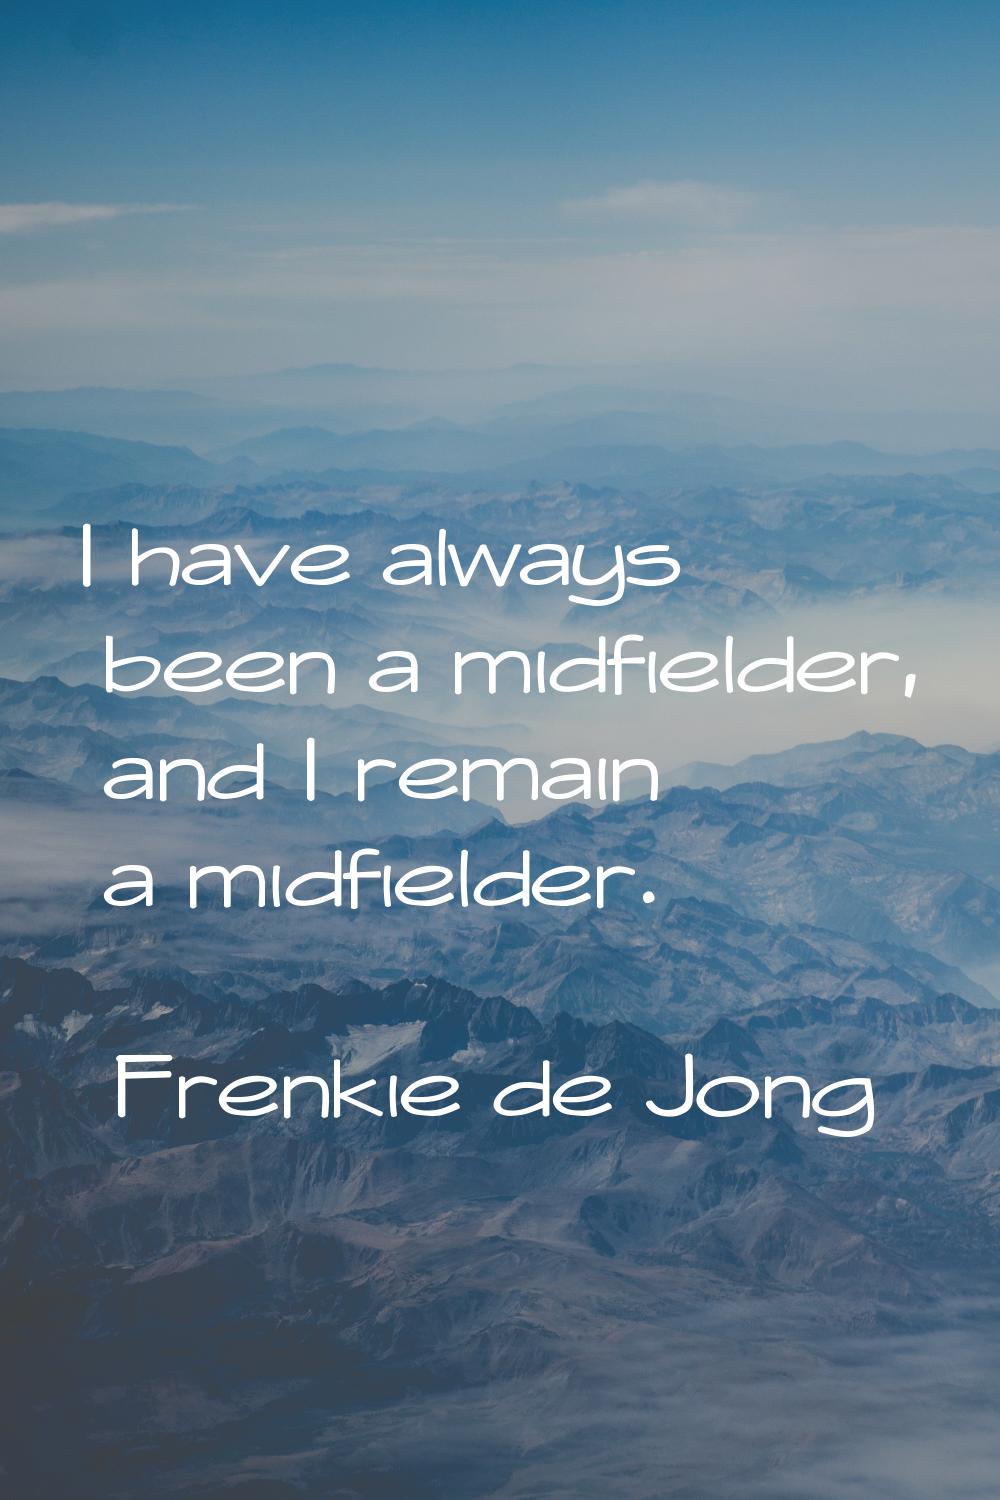 I have always been a midfielder, and I remain a midfielder.